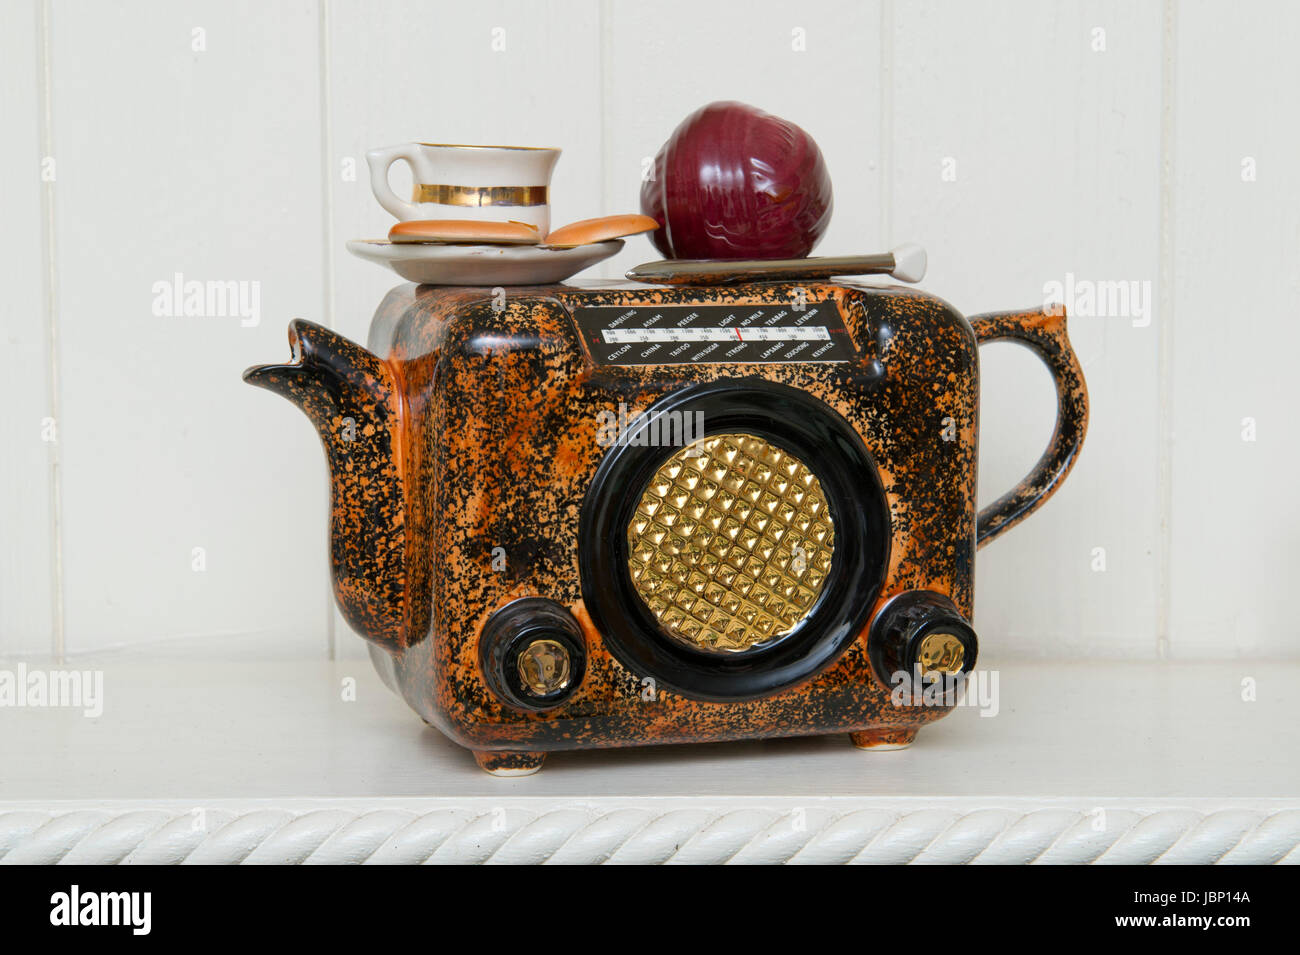 A novelty teapot in the shape of a radio with a cup of tea and biscuits and knitting needles and ball of wool. Stock Photo